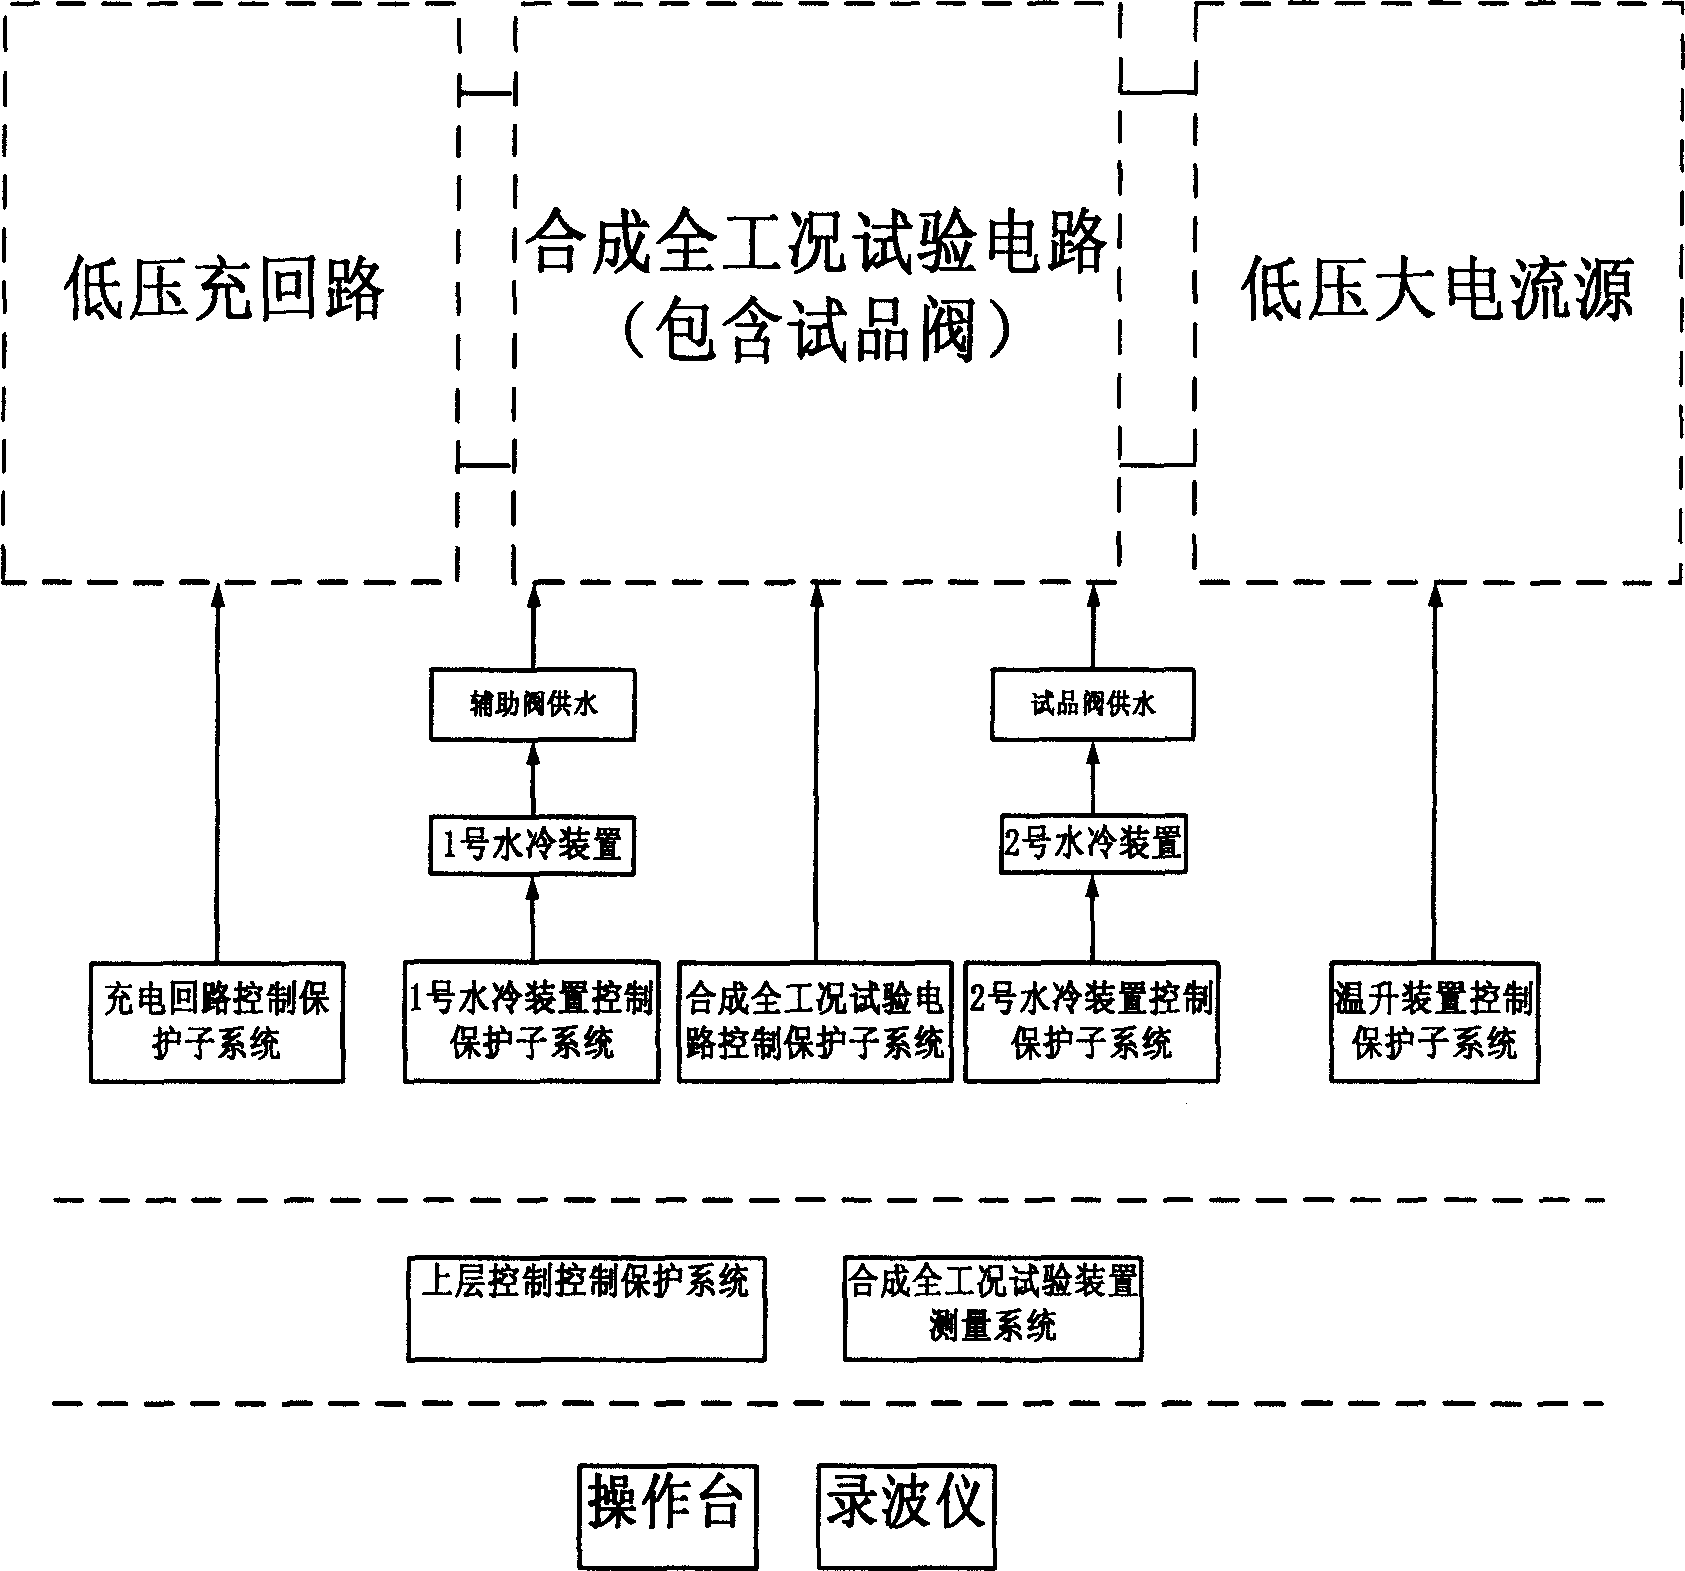 Compound whole-working order testing device control and protection system, and failure protection scheme